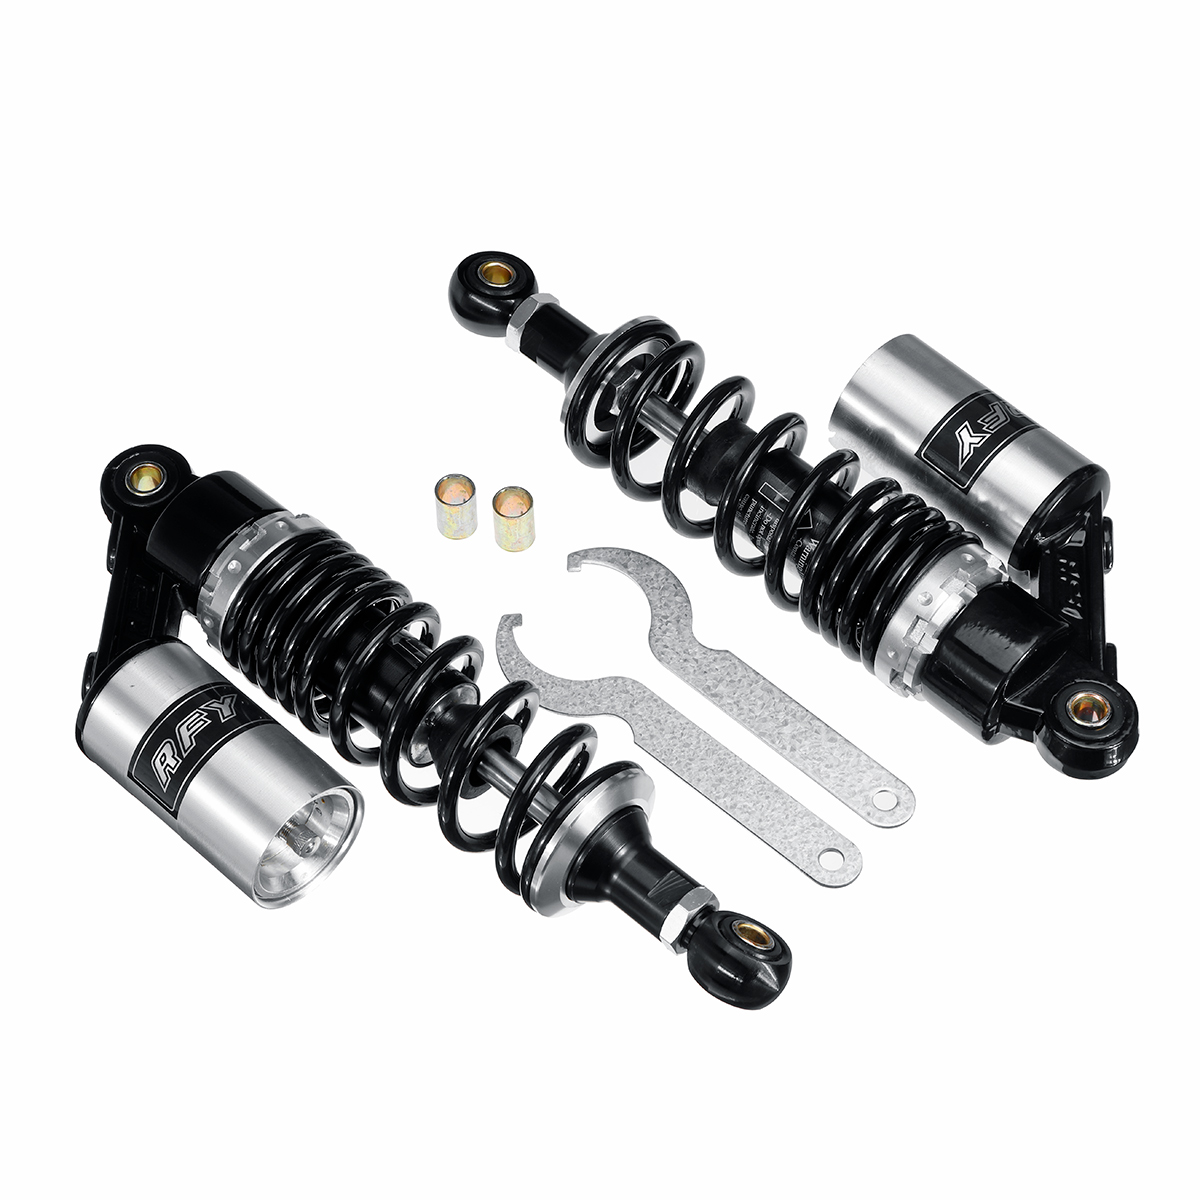 

Pair Round Hole 400mm 15.75" Motorcycle Rear Air Shock Absorber Suspension Scooter ATV RFY